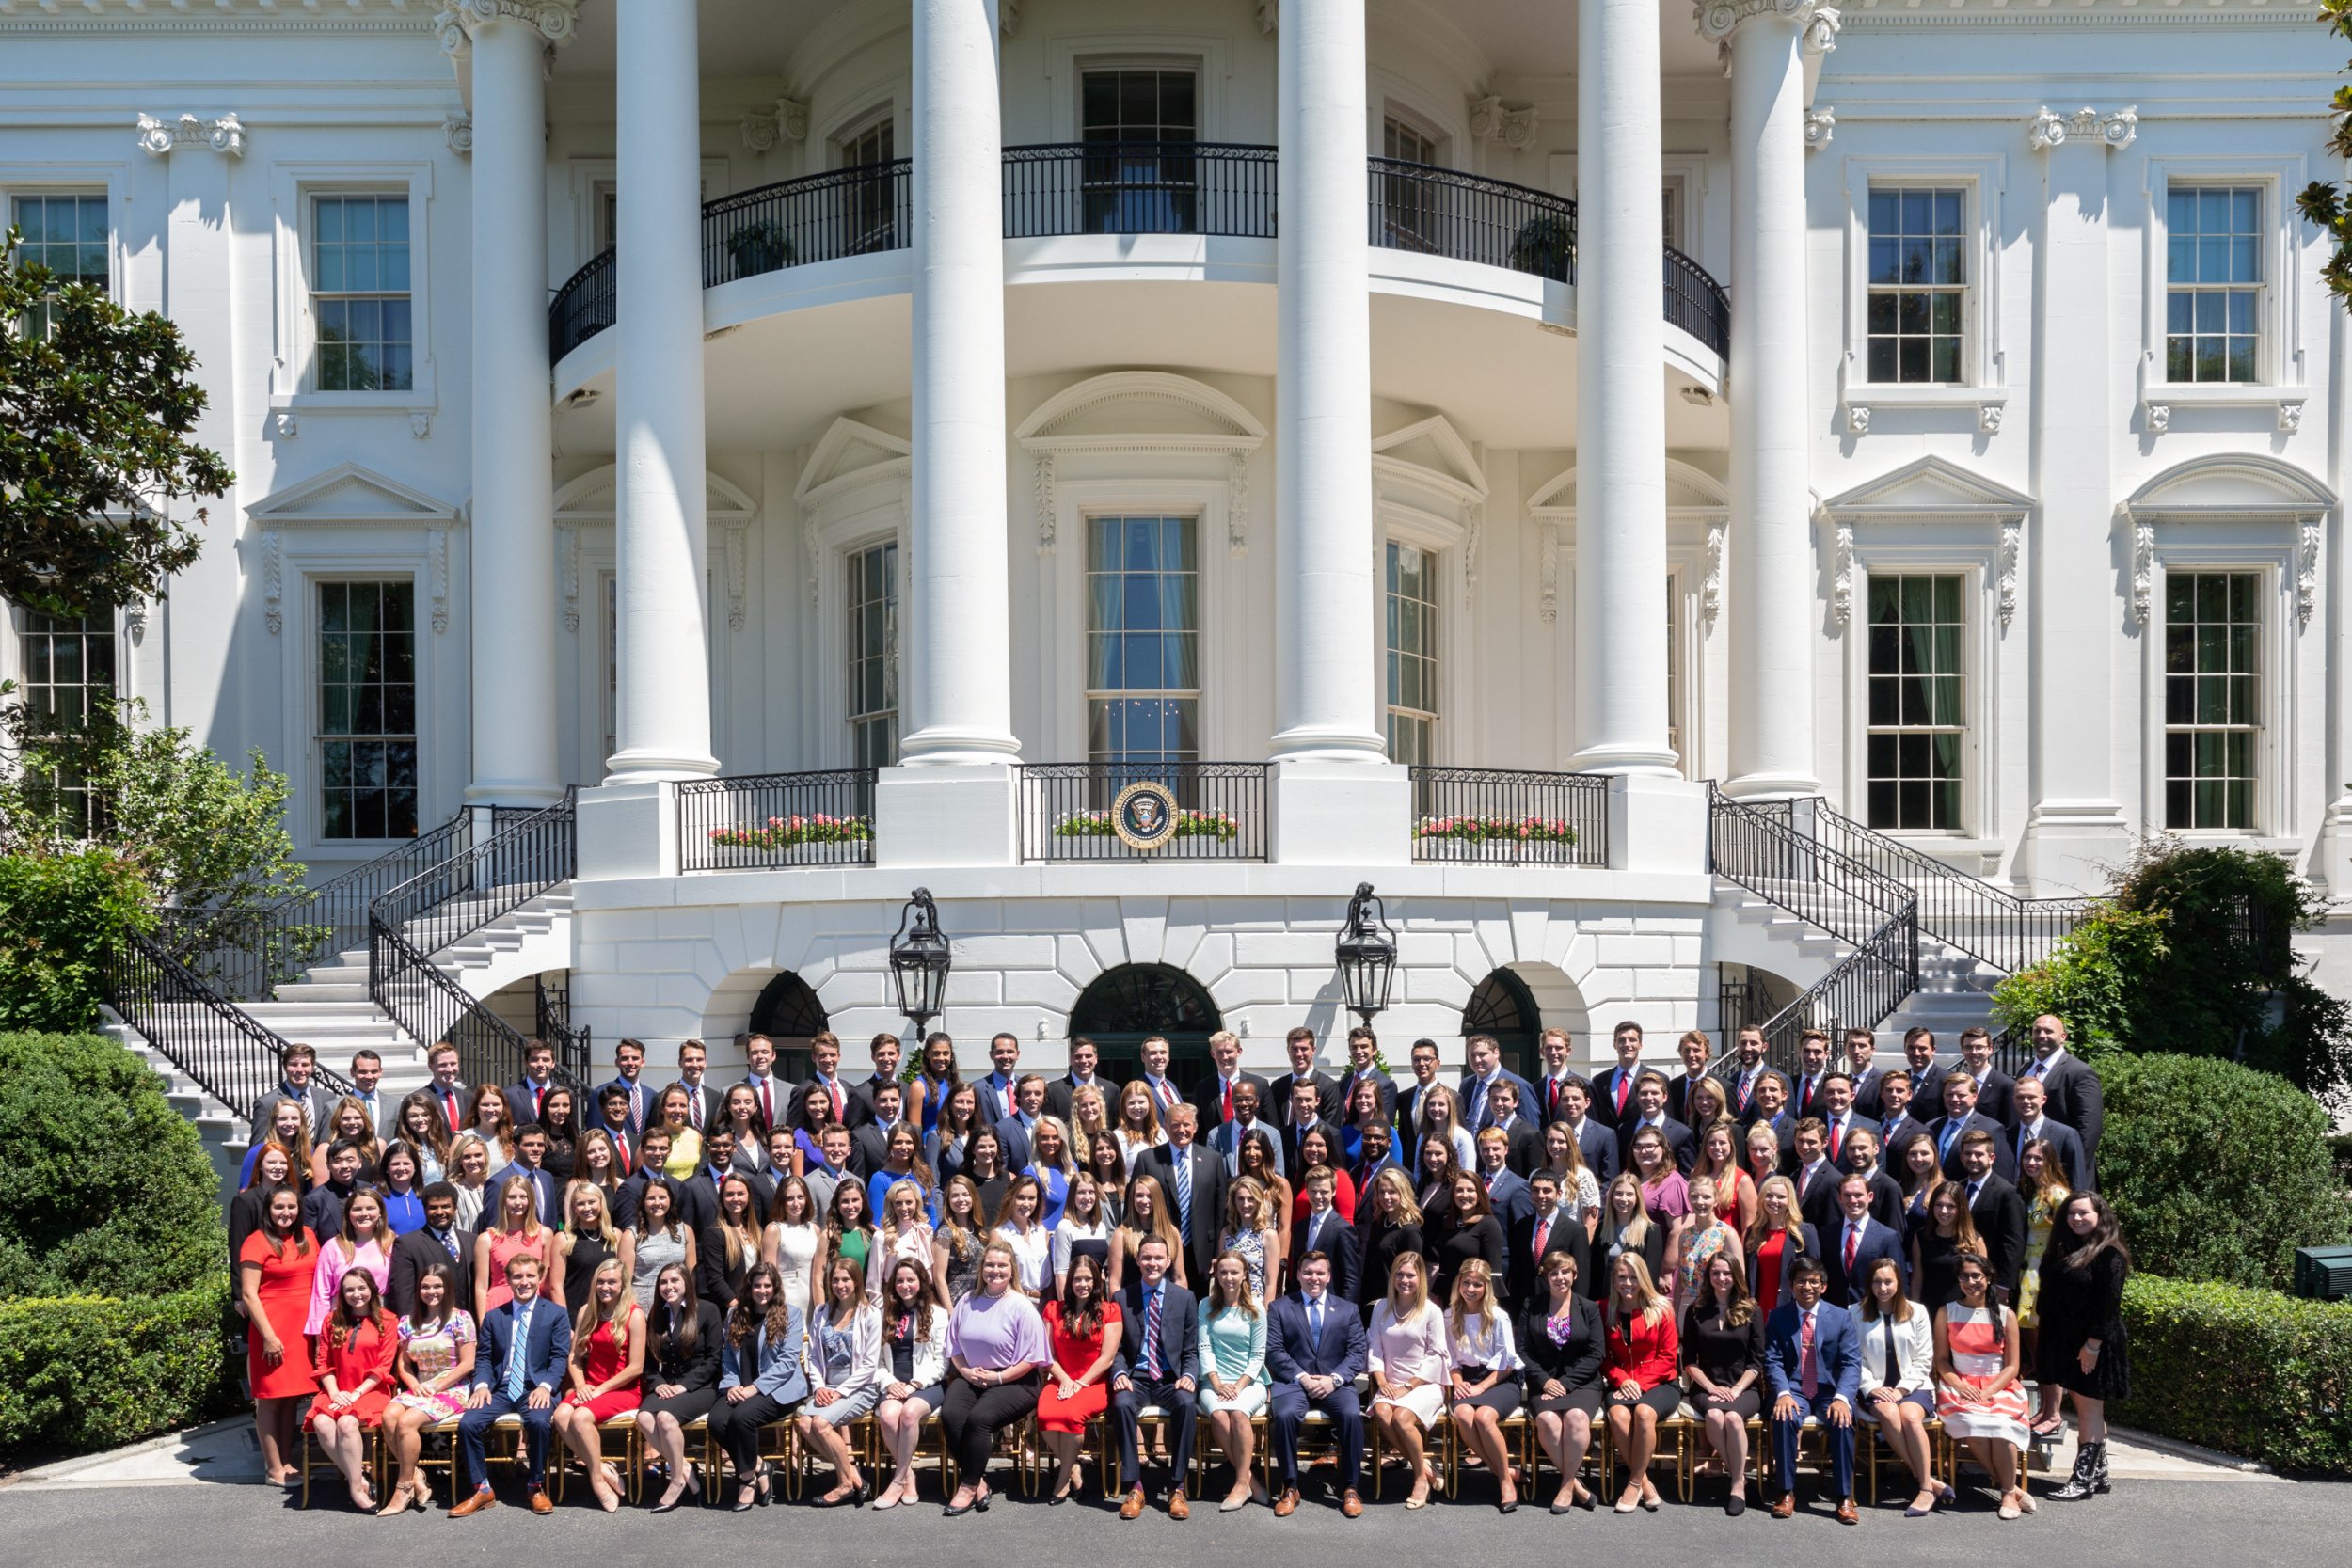 New White House Intern Photo Shows Trump's Class is No More Diverse